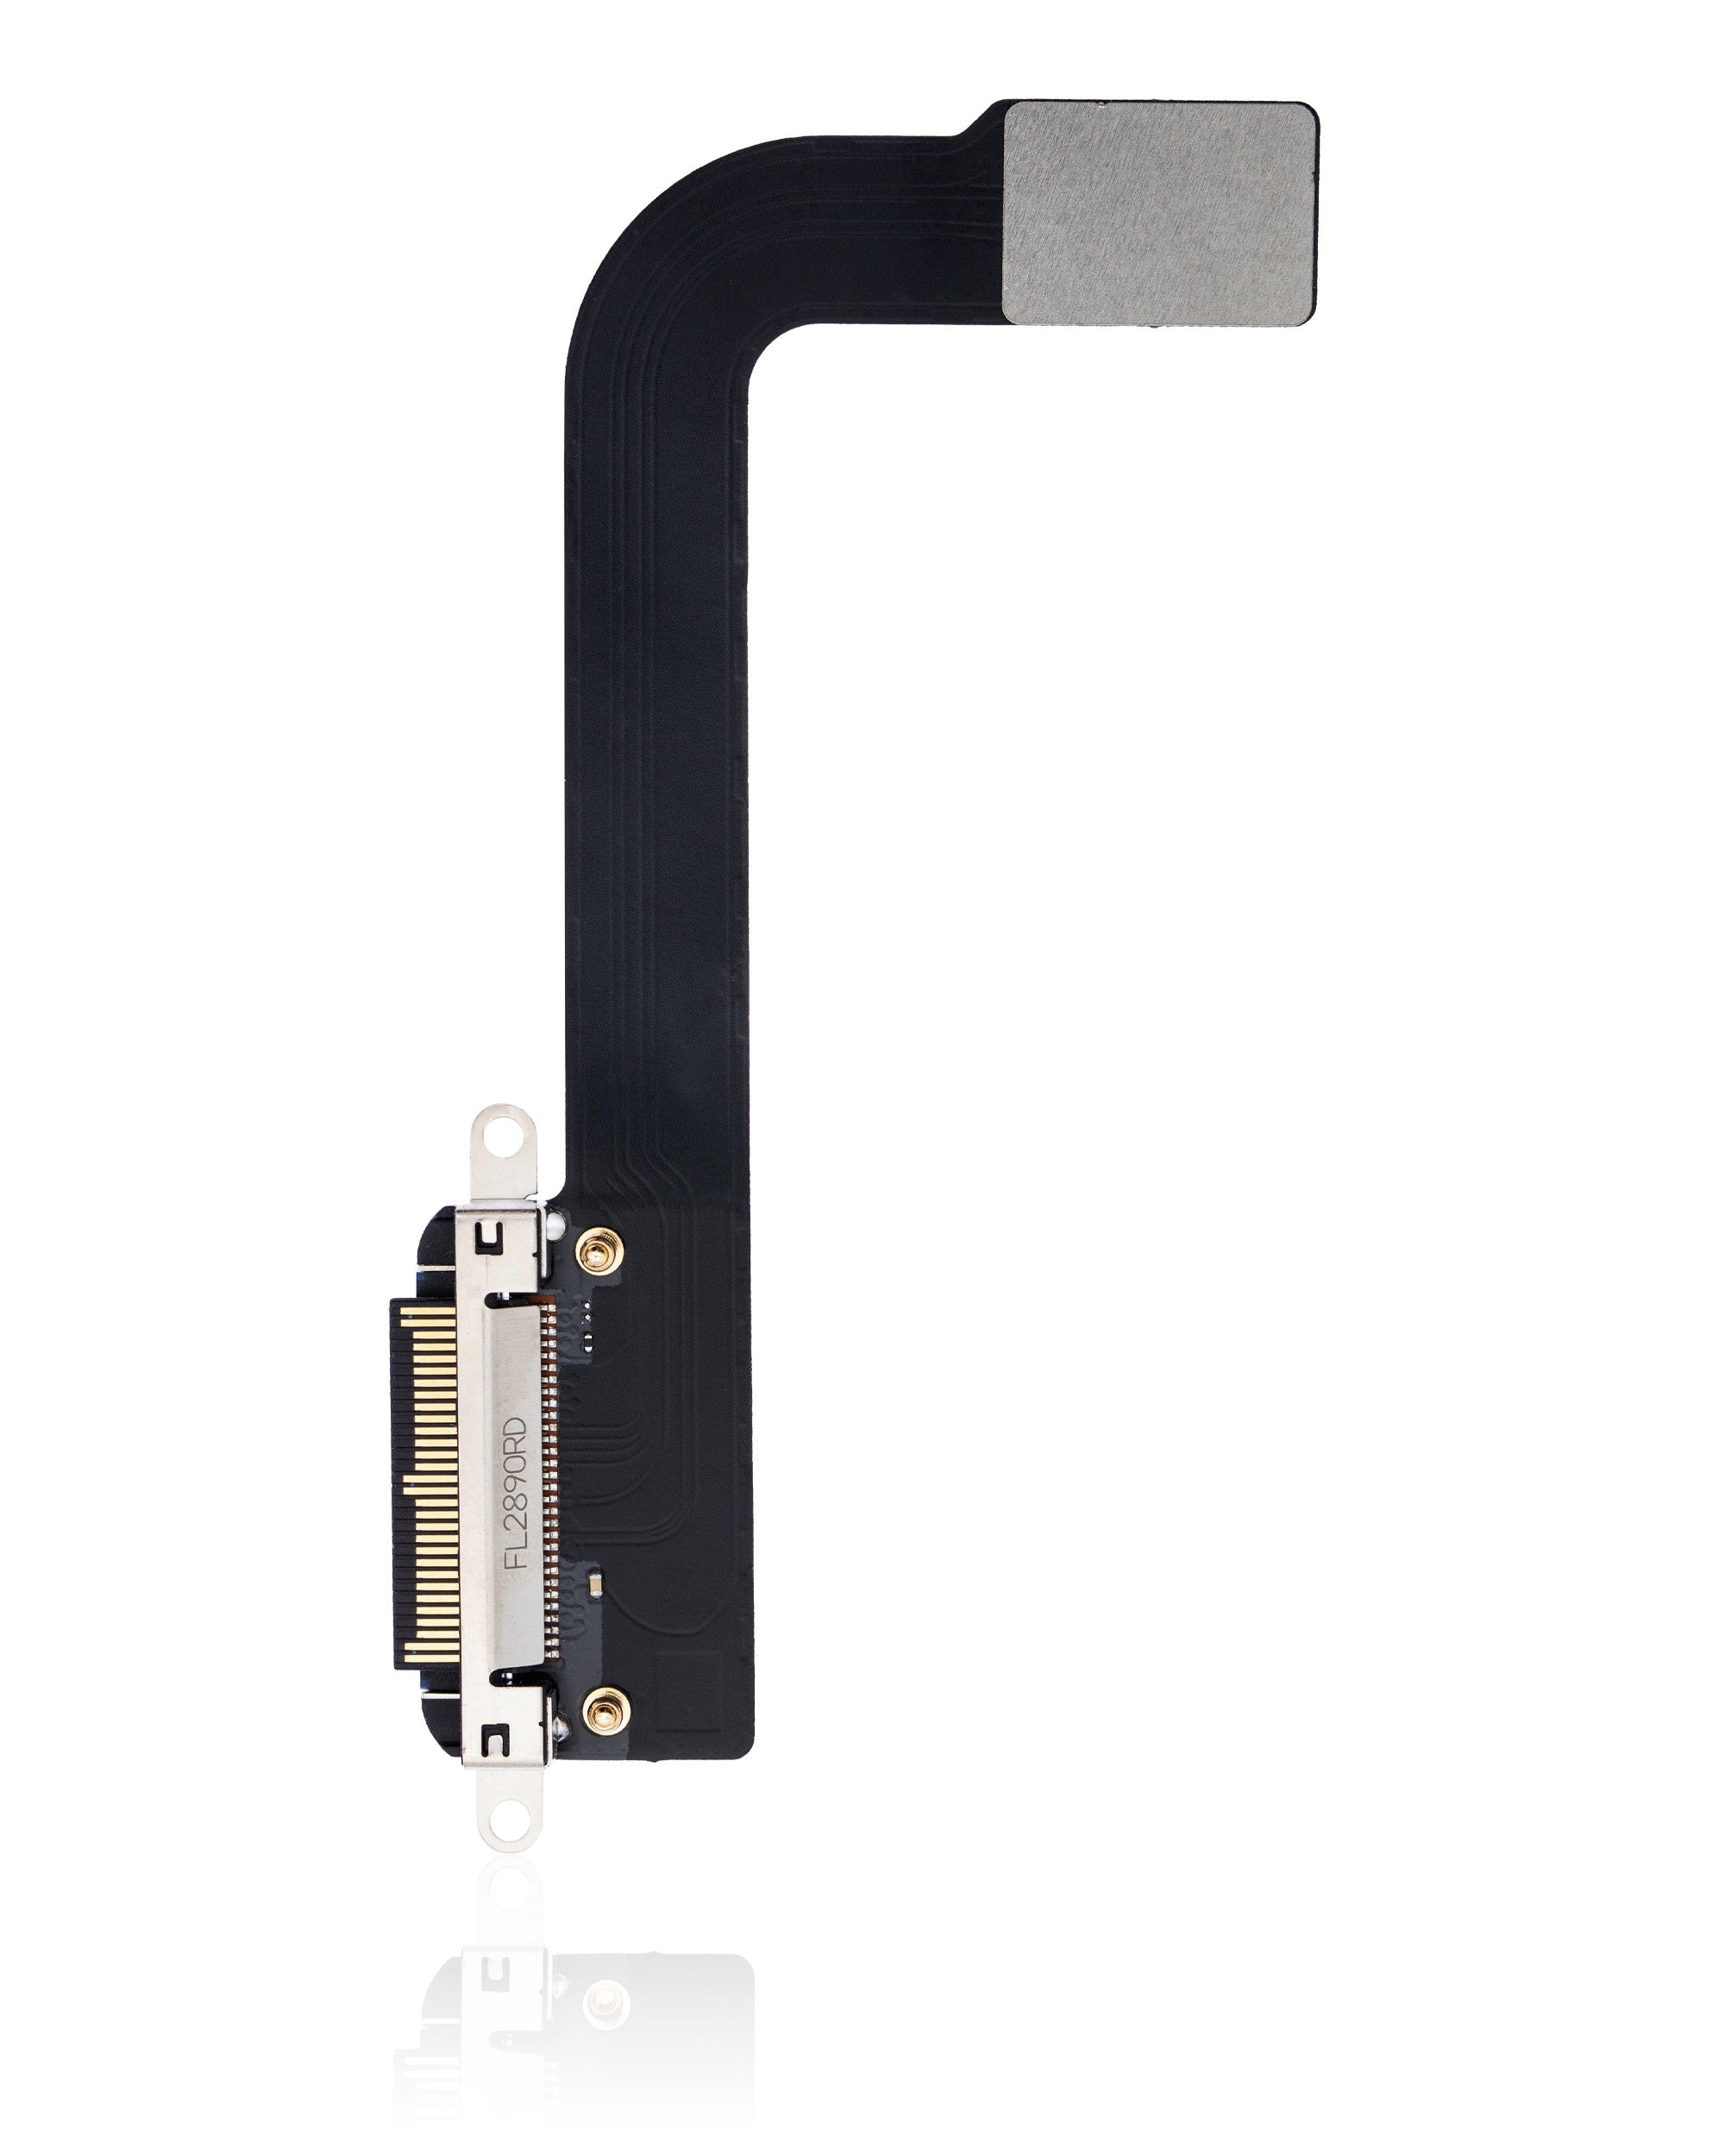 For iPad 3 Charging Port Replacement